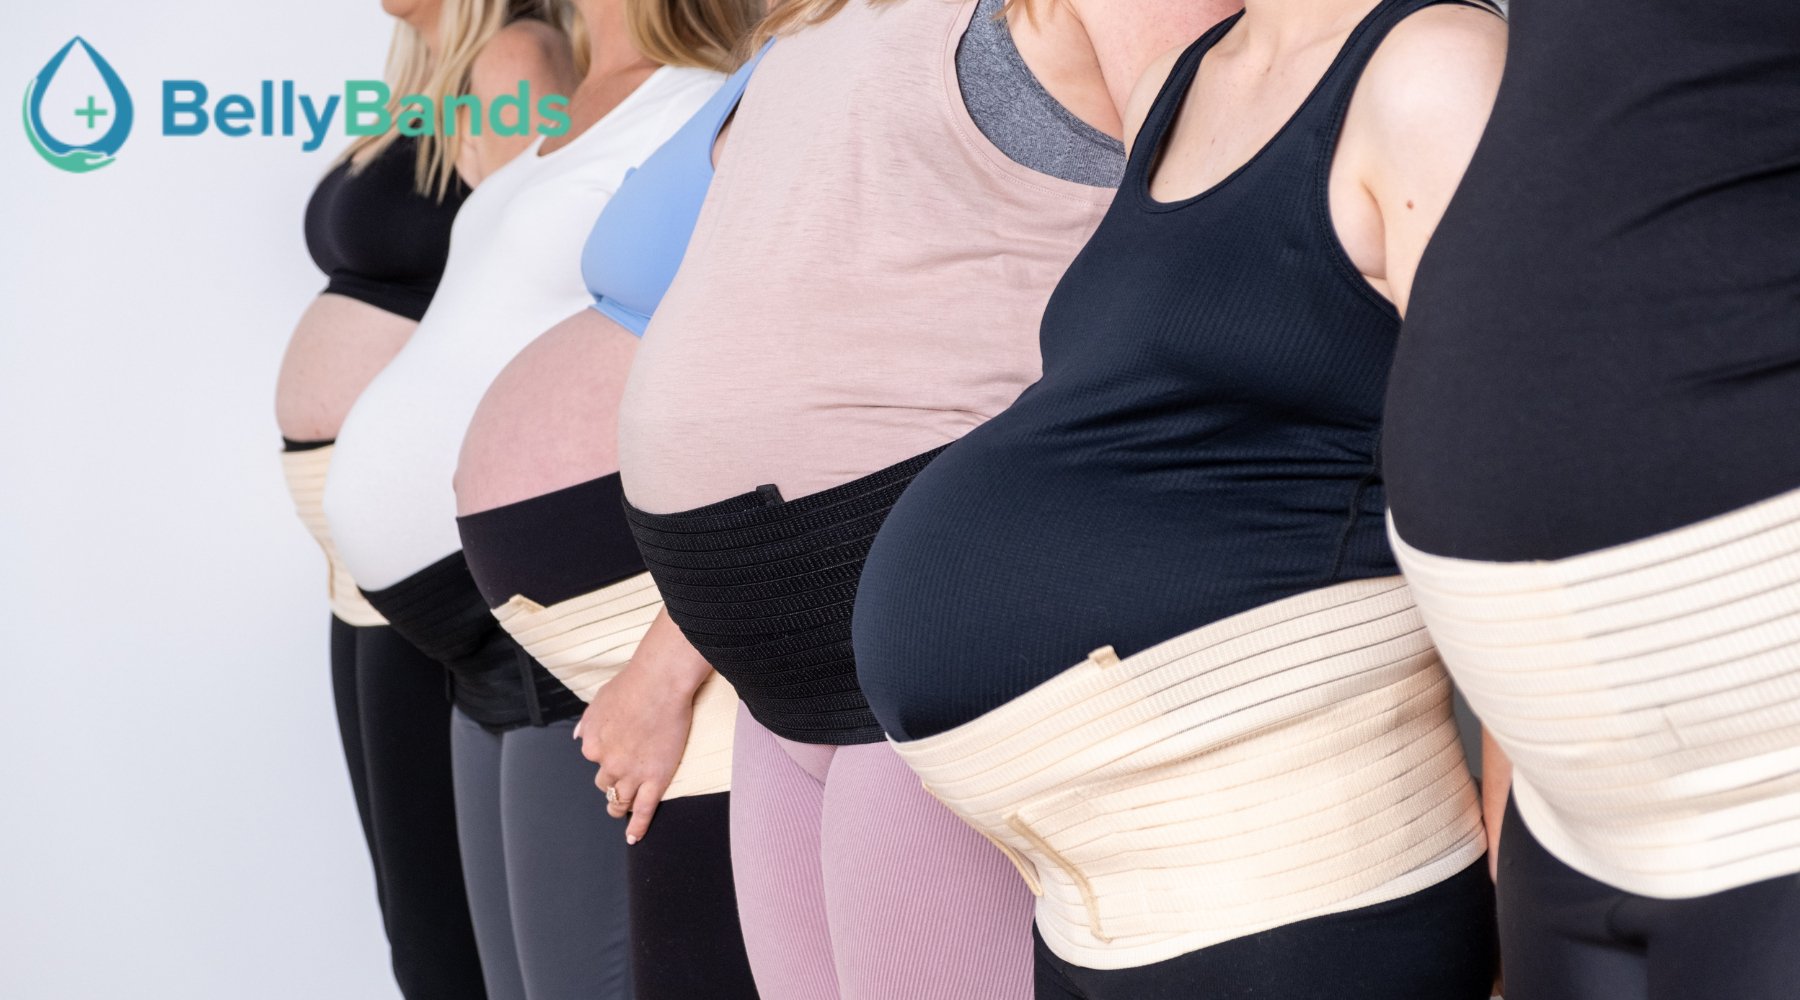 Are belly bands safe to wear during pregnancy? – Belly Bands